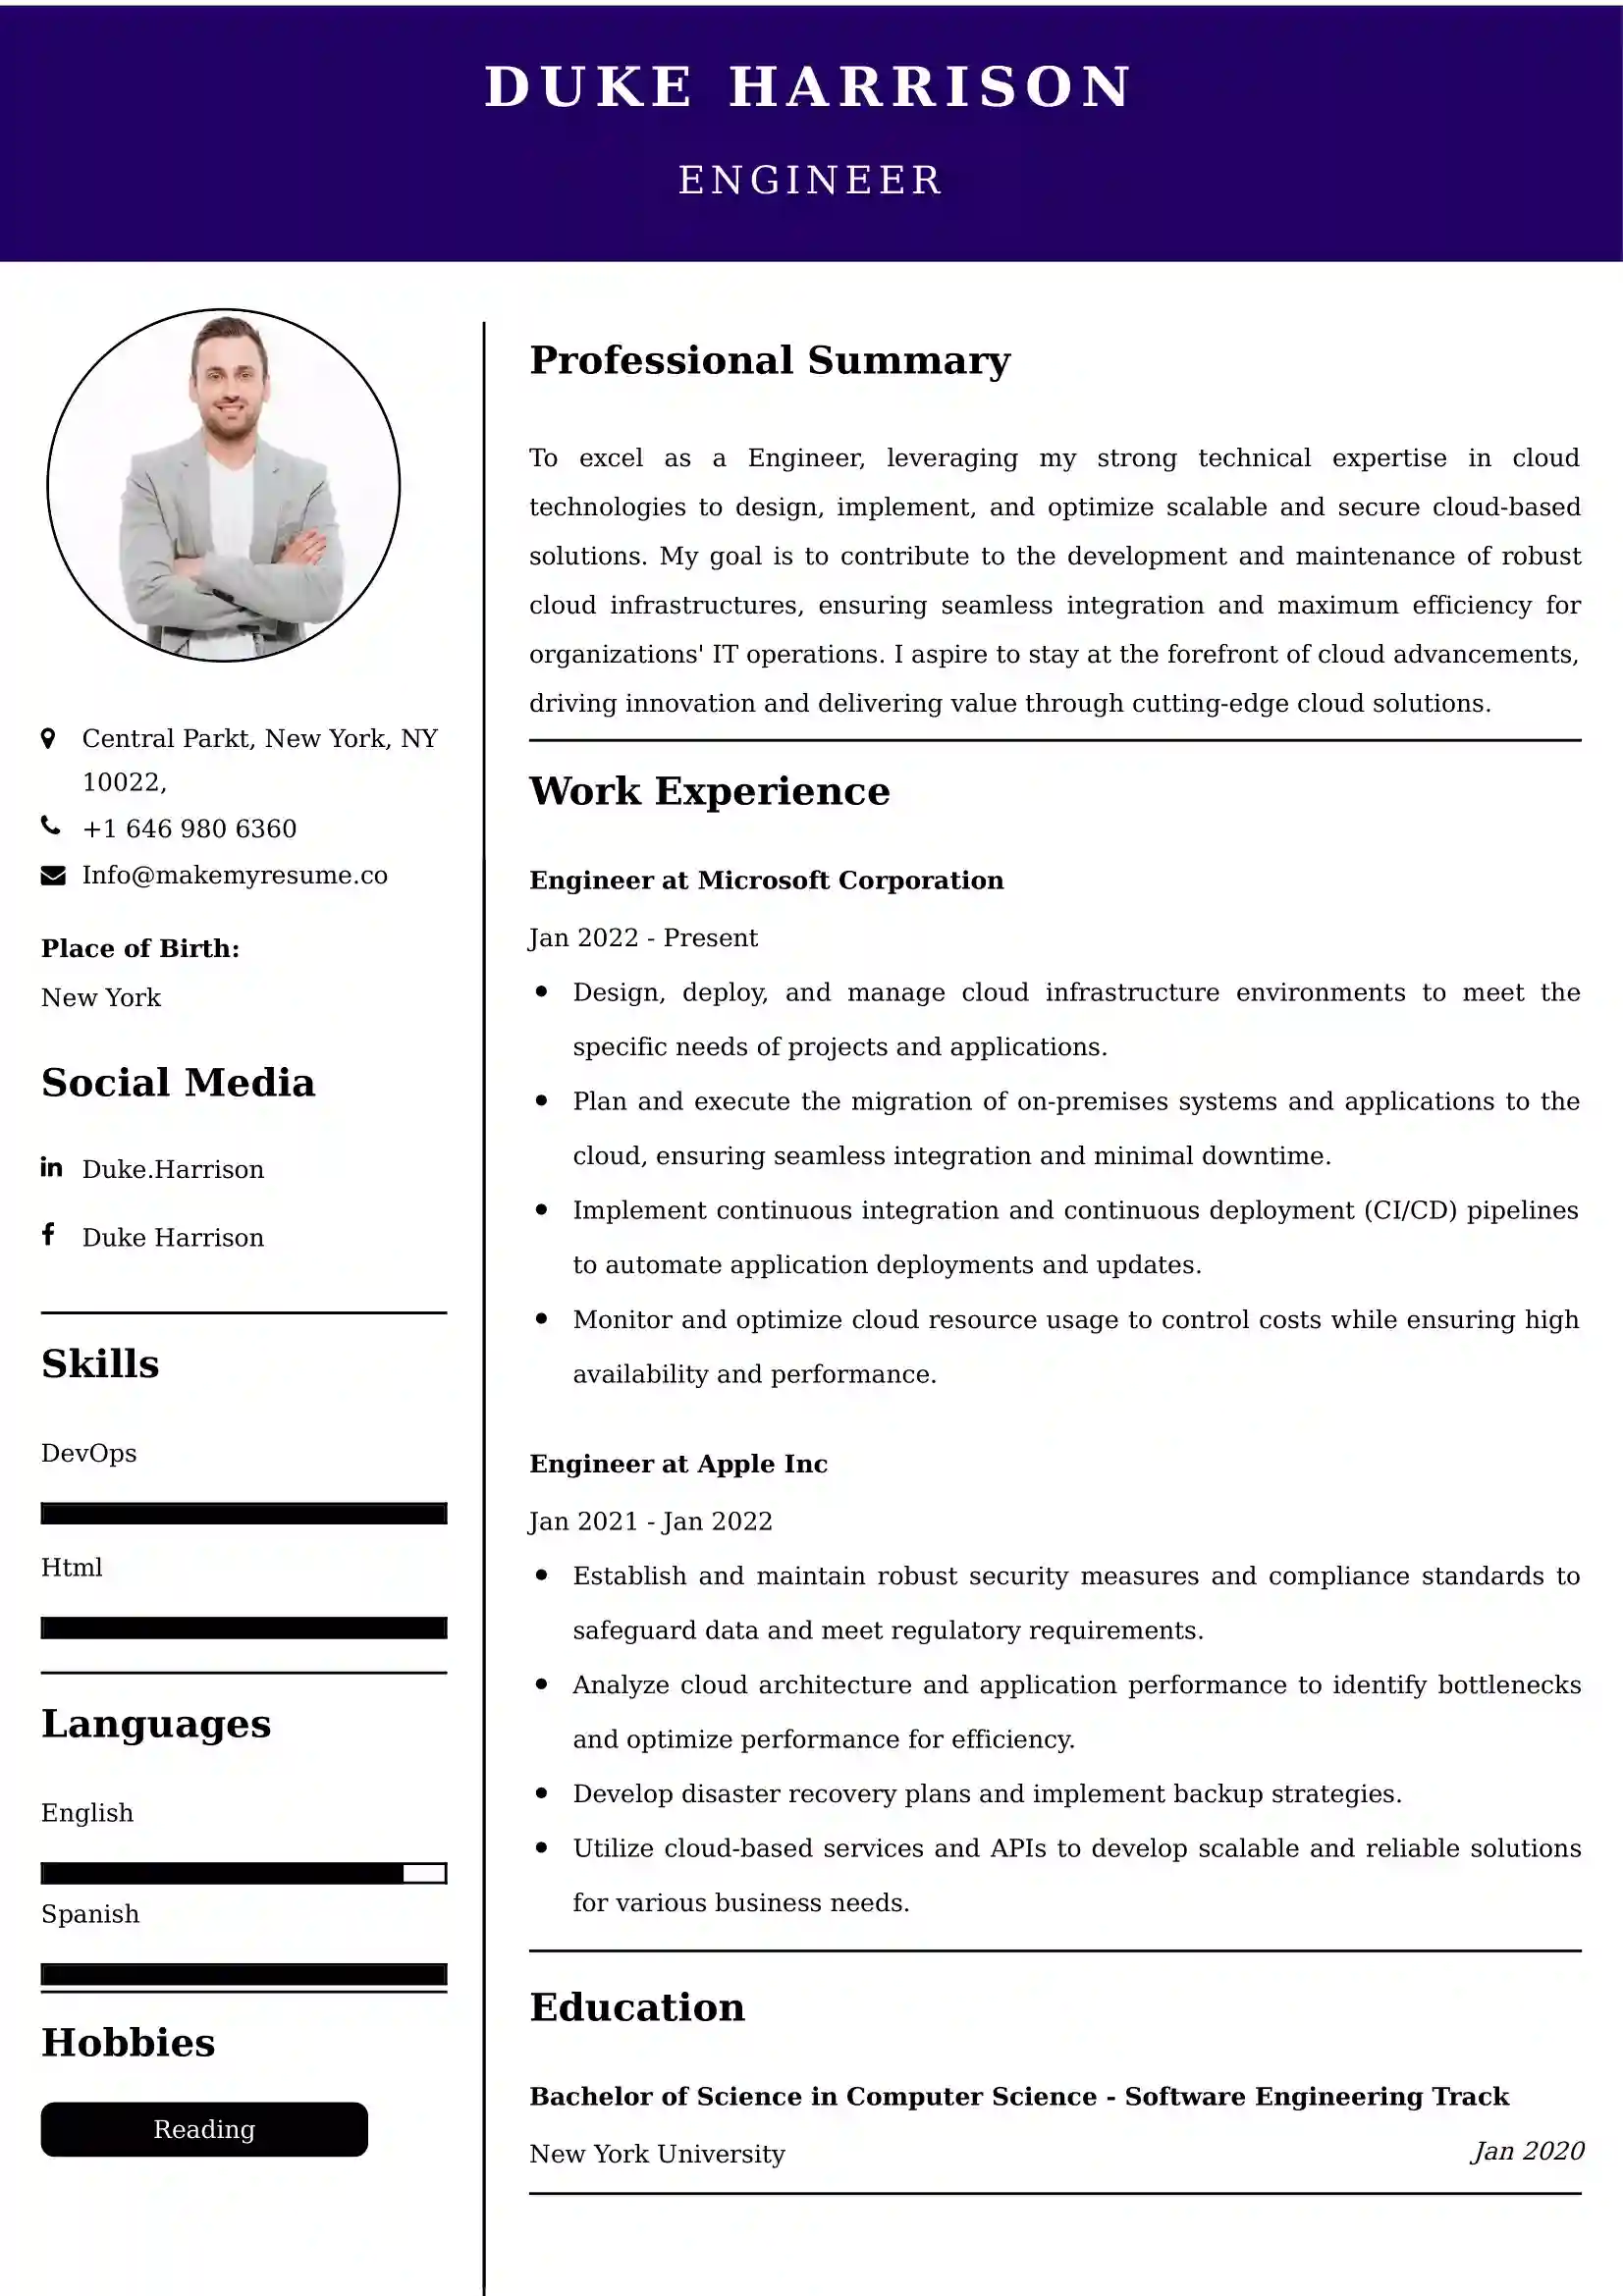 Engineer Resume Examples for UK Jobs - Tips and Guide